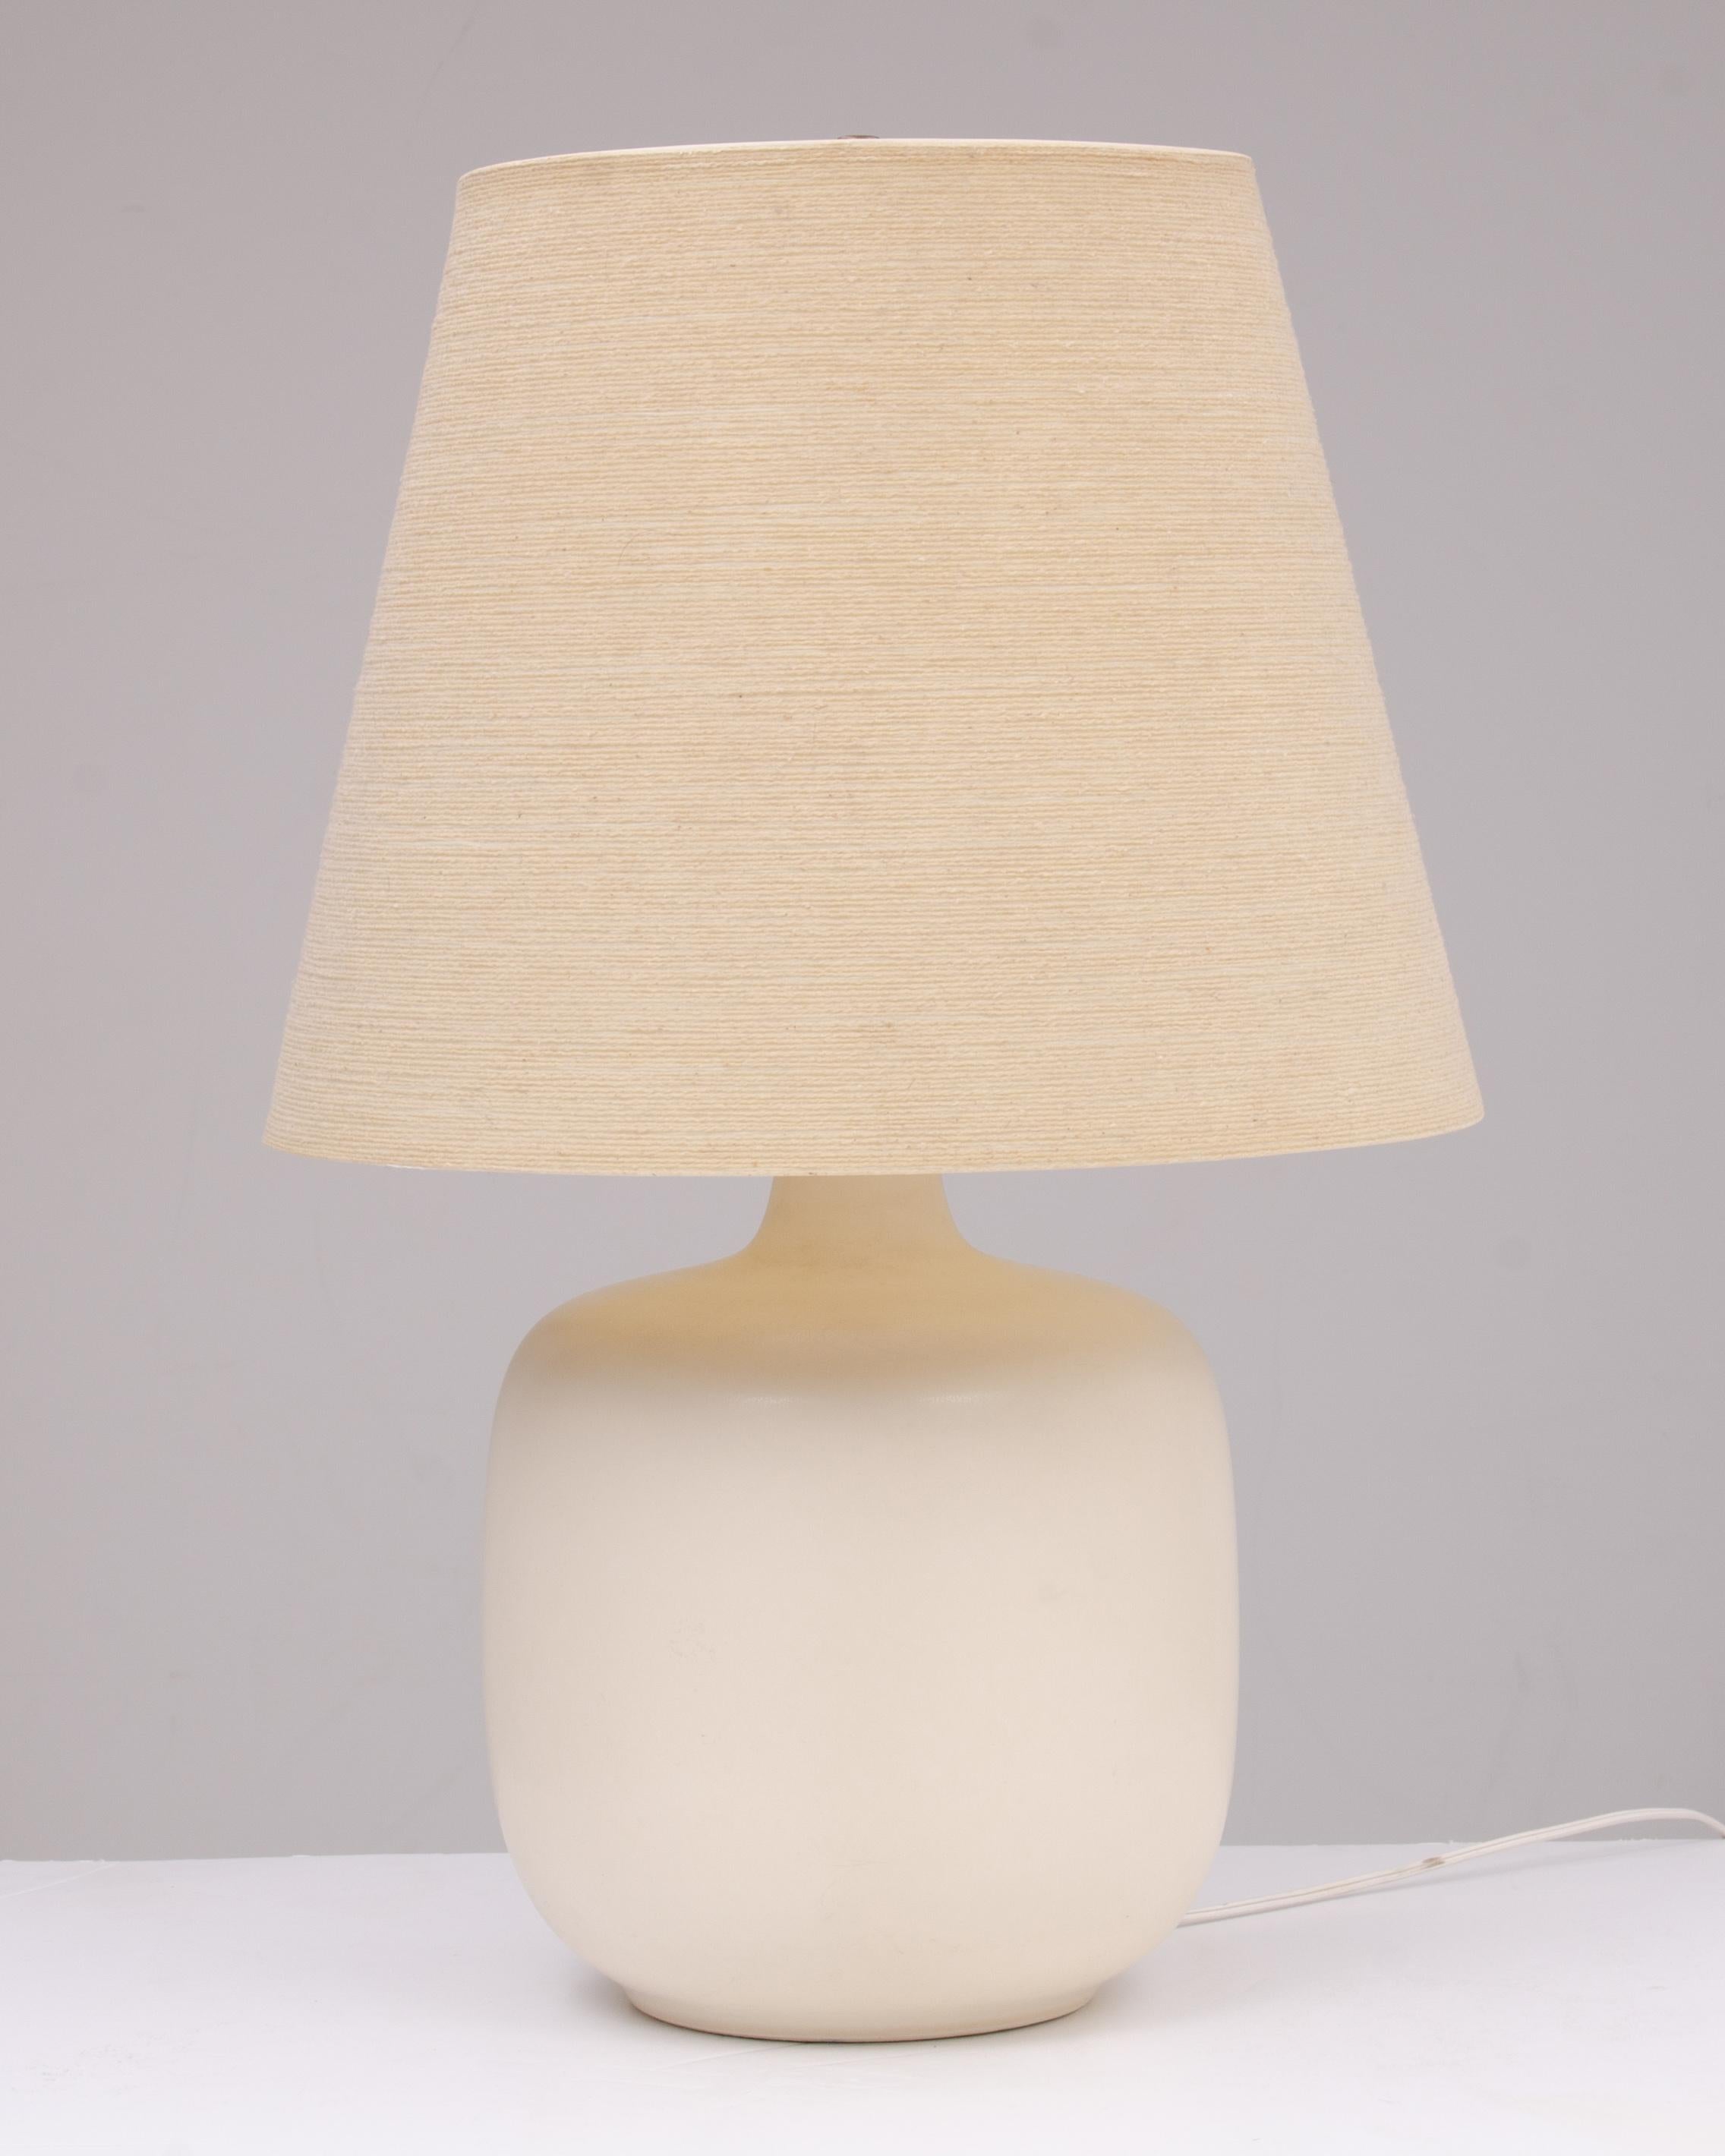 Canadian Large Lotte & Gunnar Bostlund Table Lamp Original Shade Unmarked Bone Stoneware For Sale